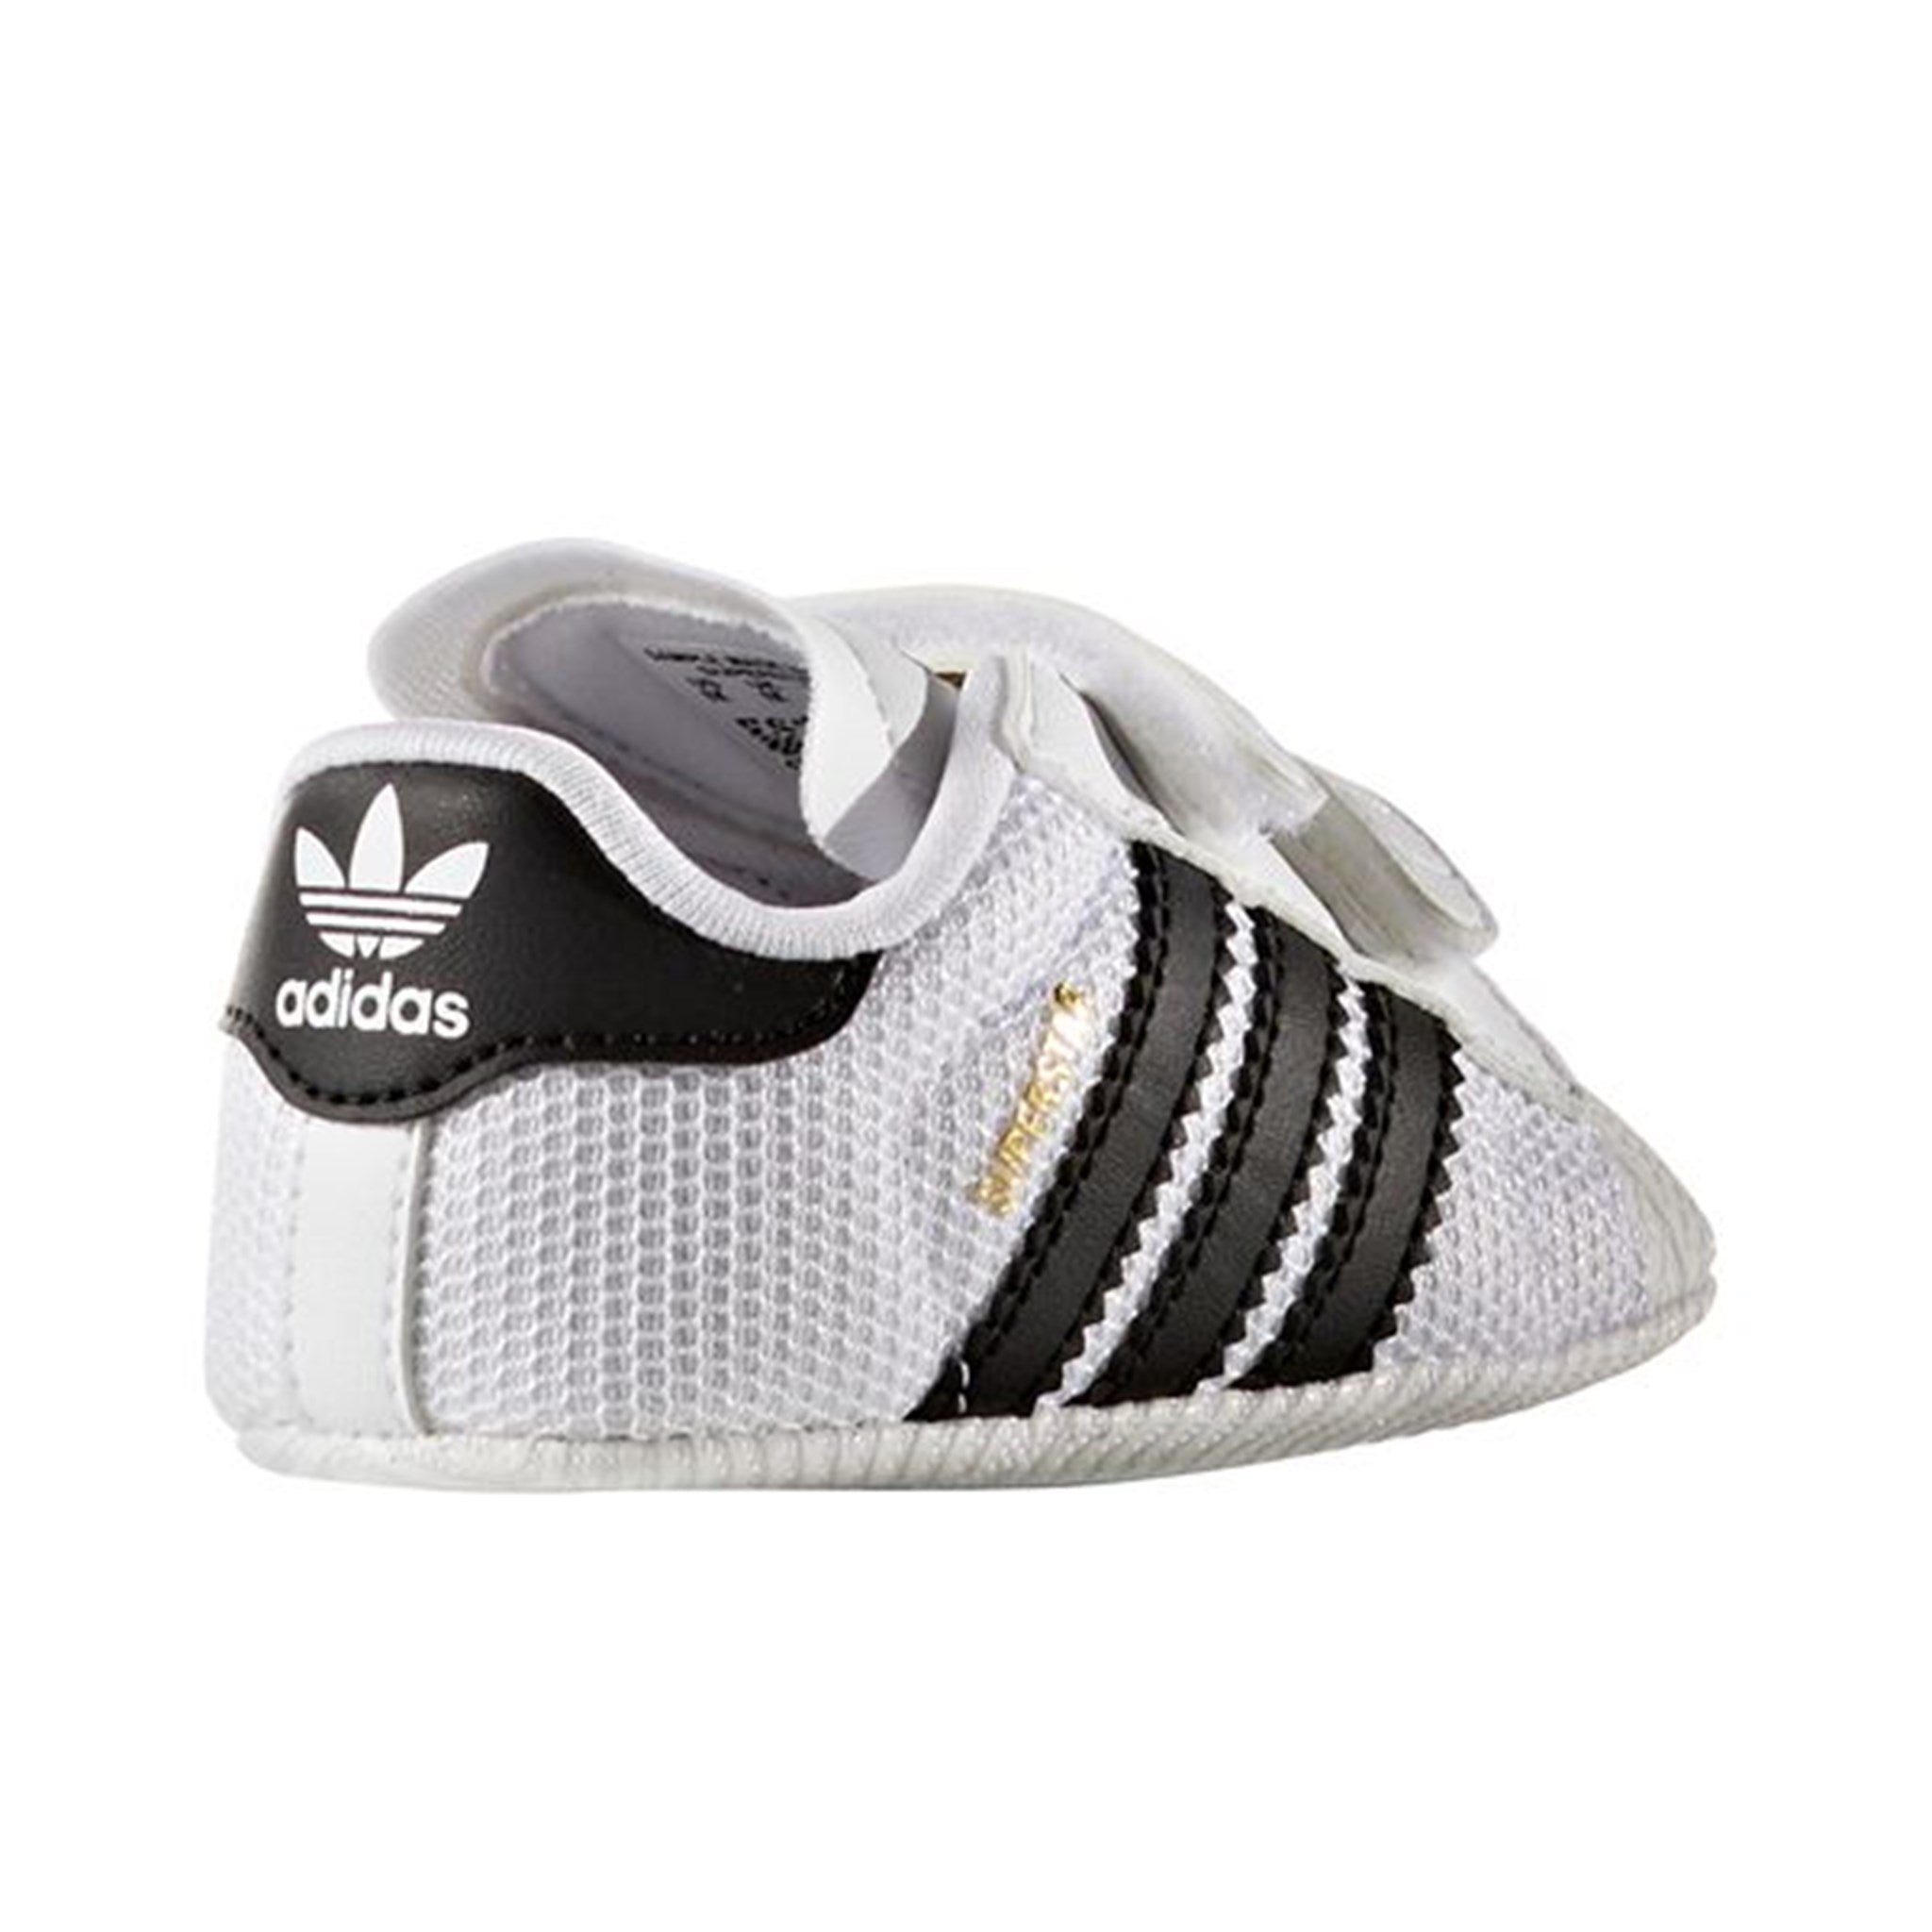 adidas Superstar Baby Sneakers White/Black S79916 2